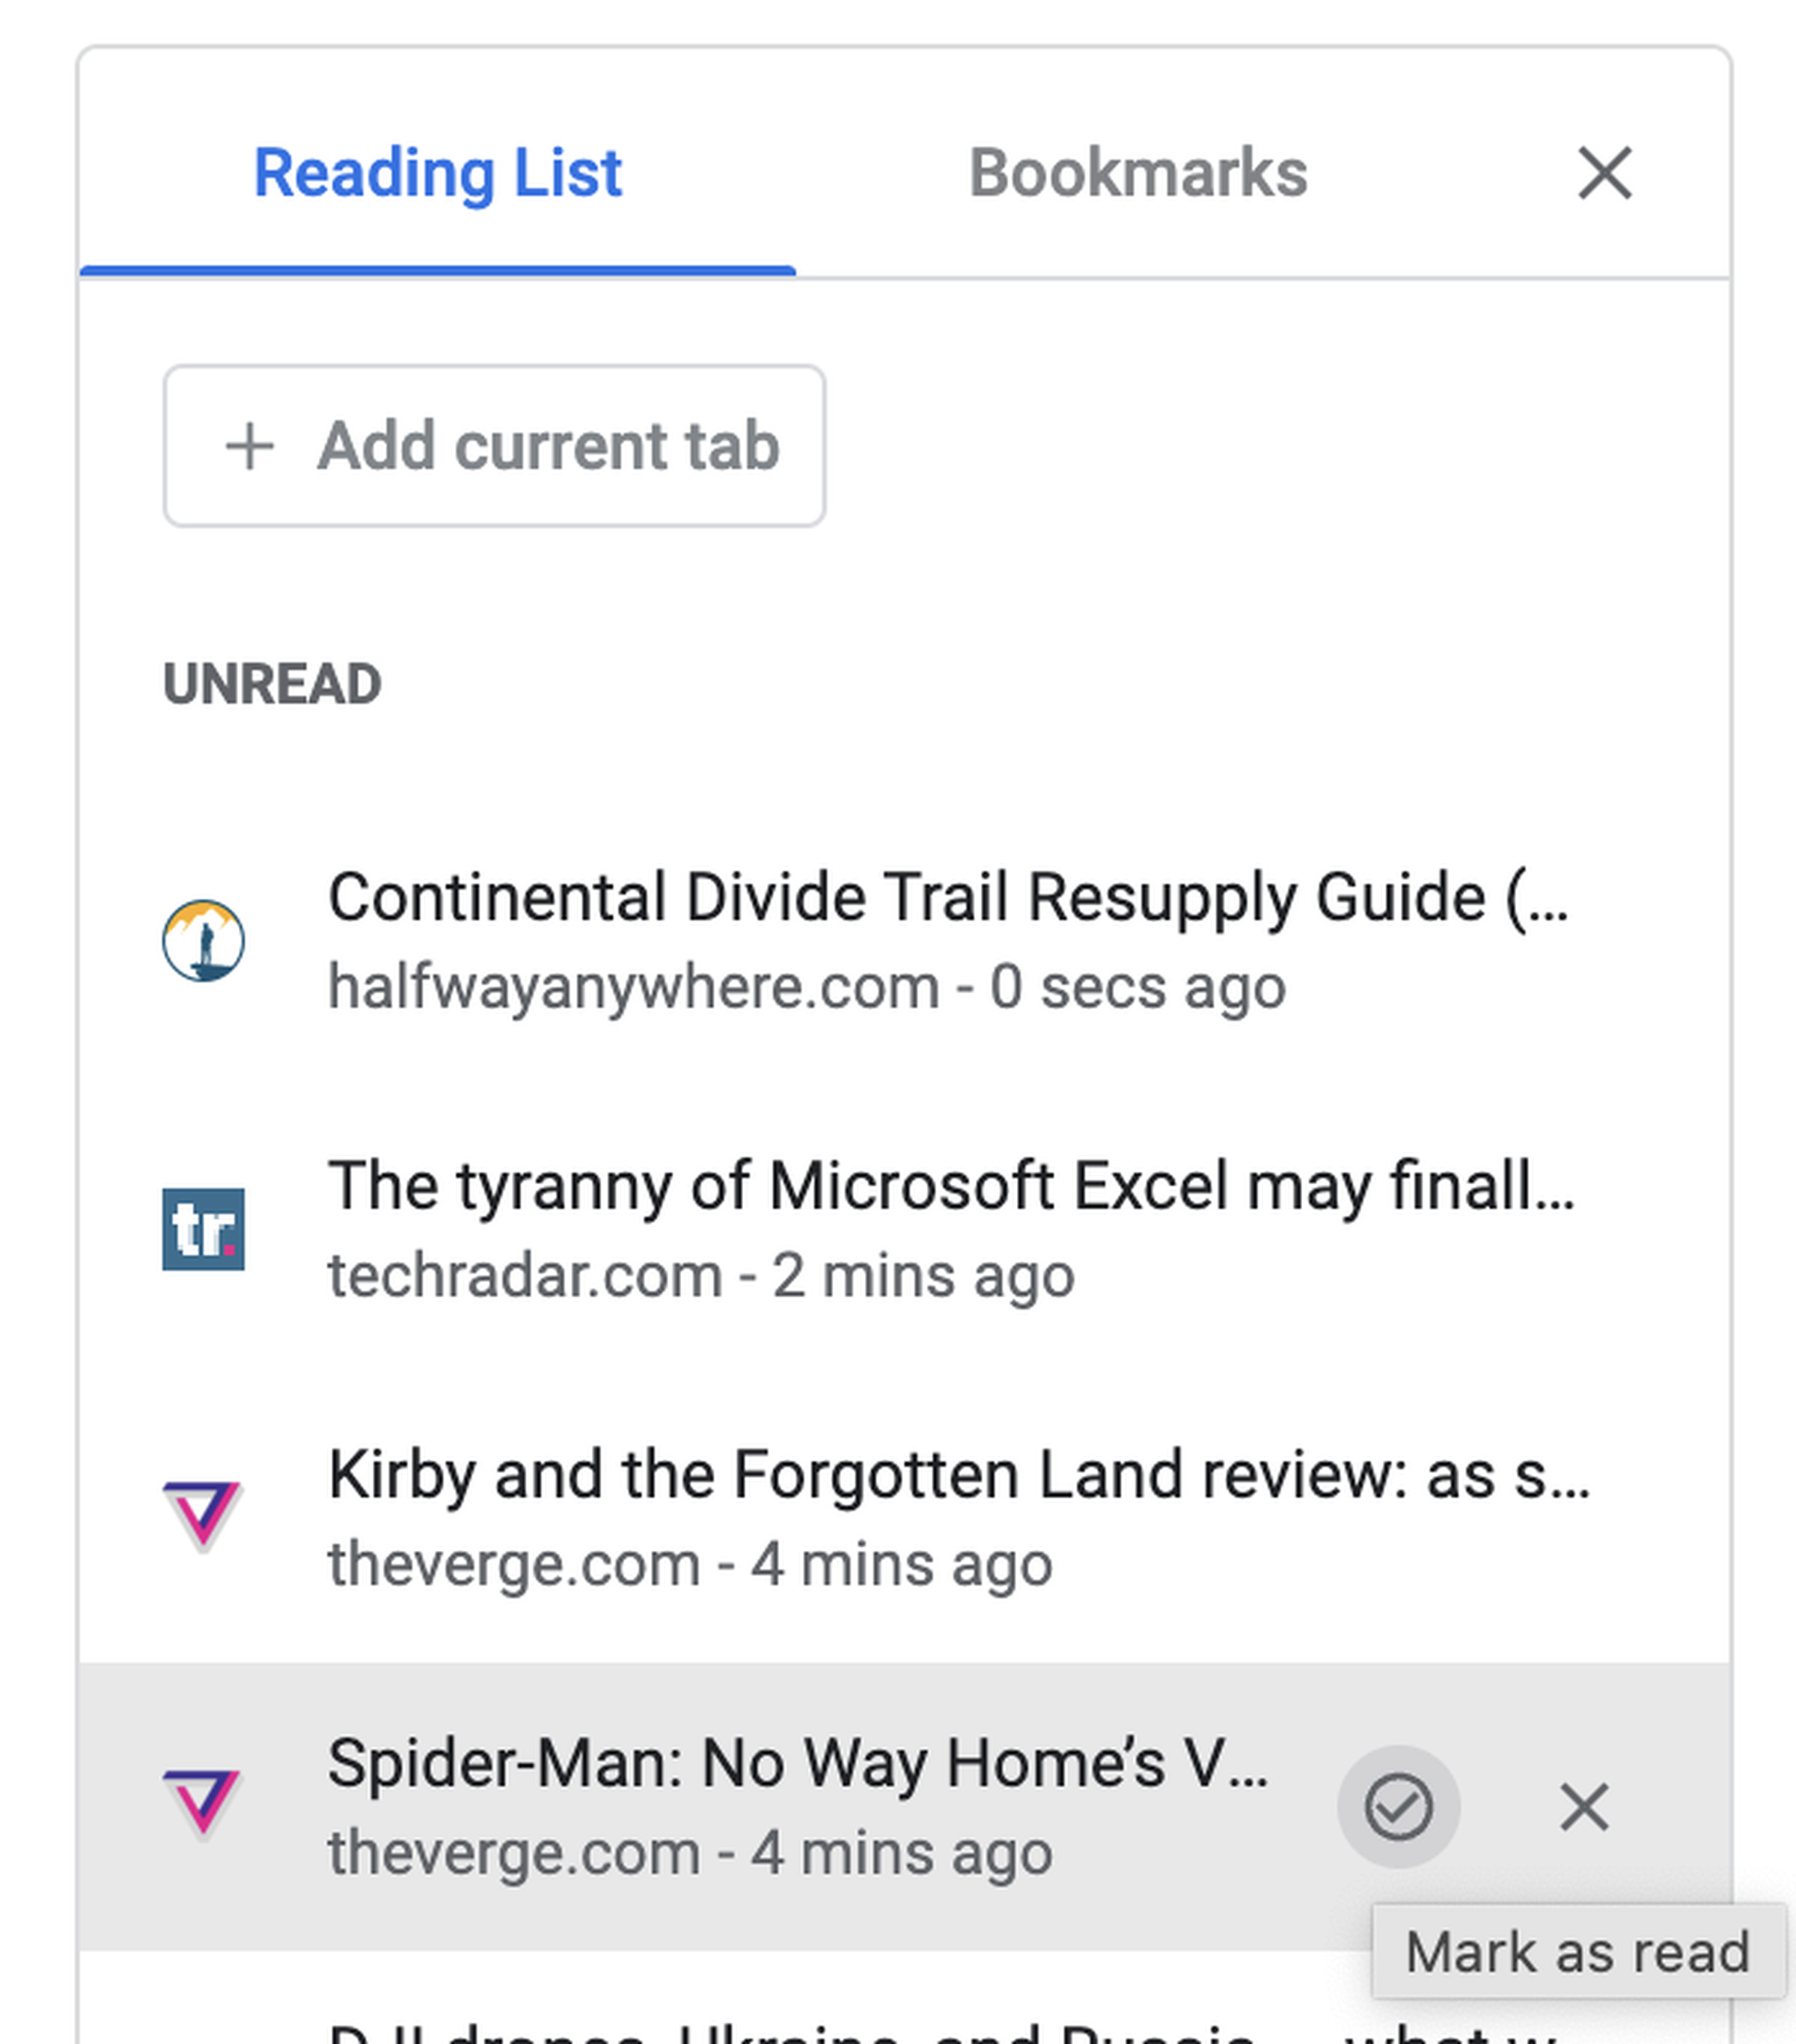 Of course, you’re still easily able to mark items in the reading list as read, or remove them from your list.